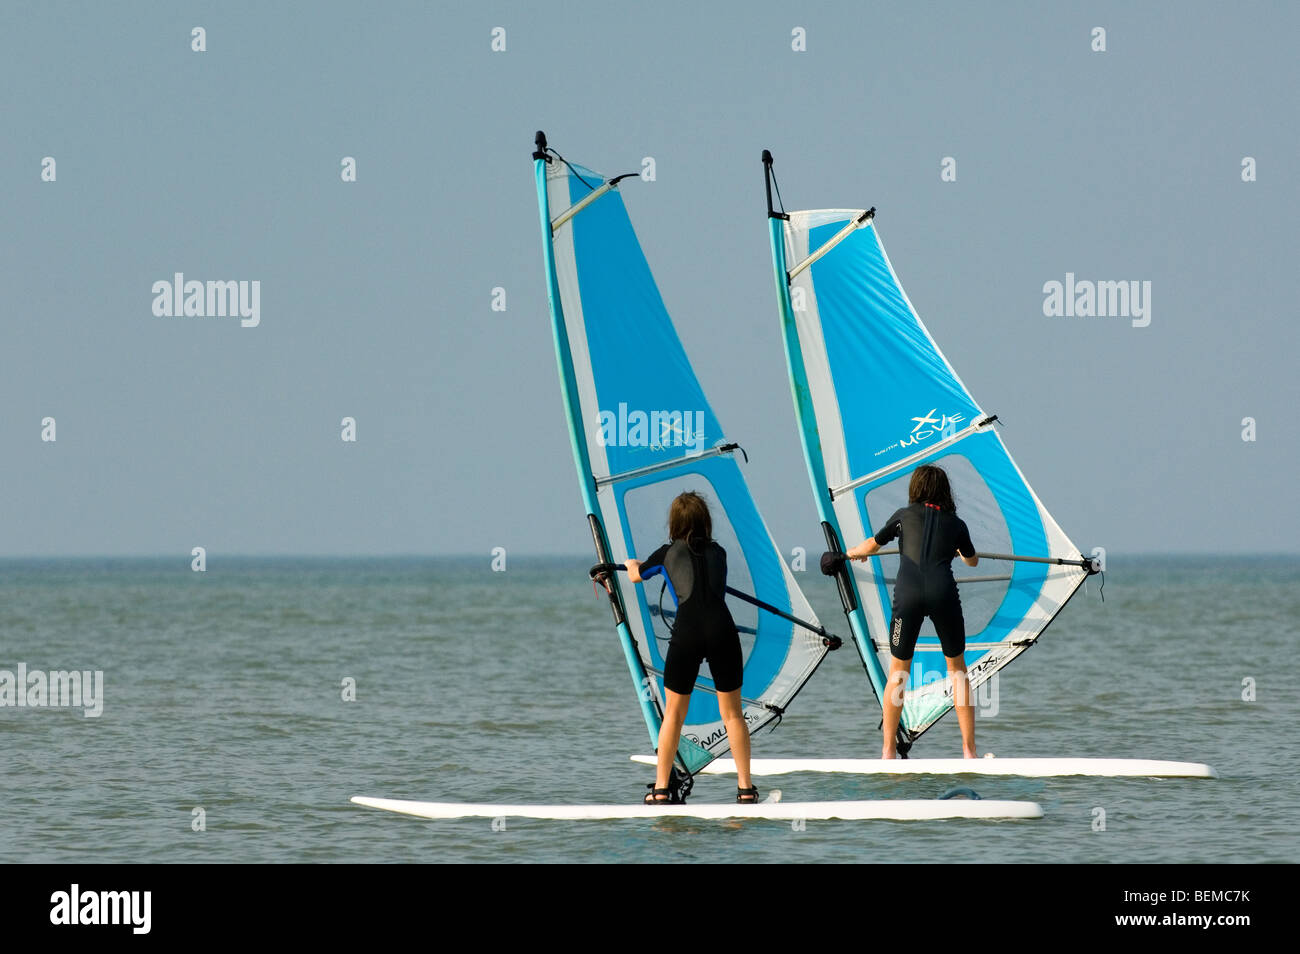 Two young girls windsurfing along the North Sea coast Stock Photo